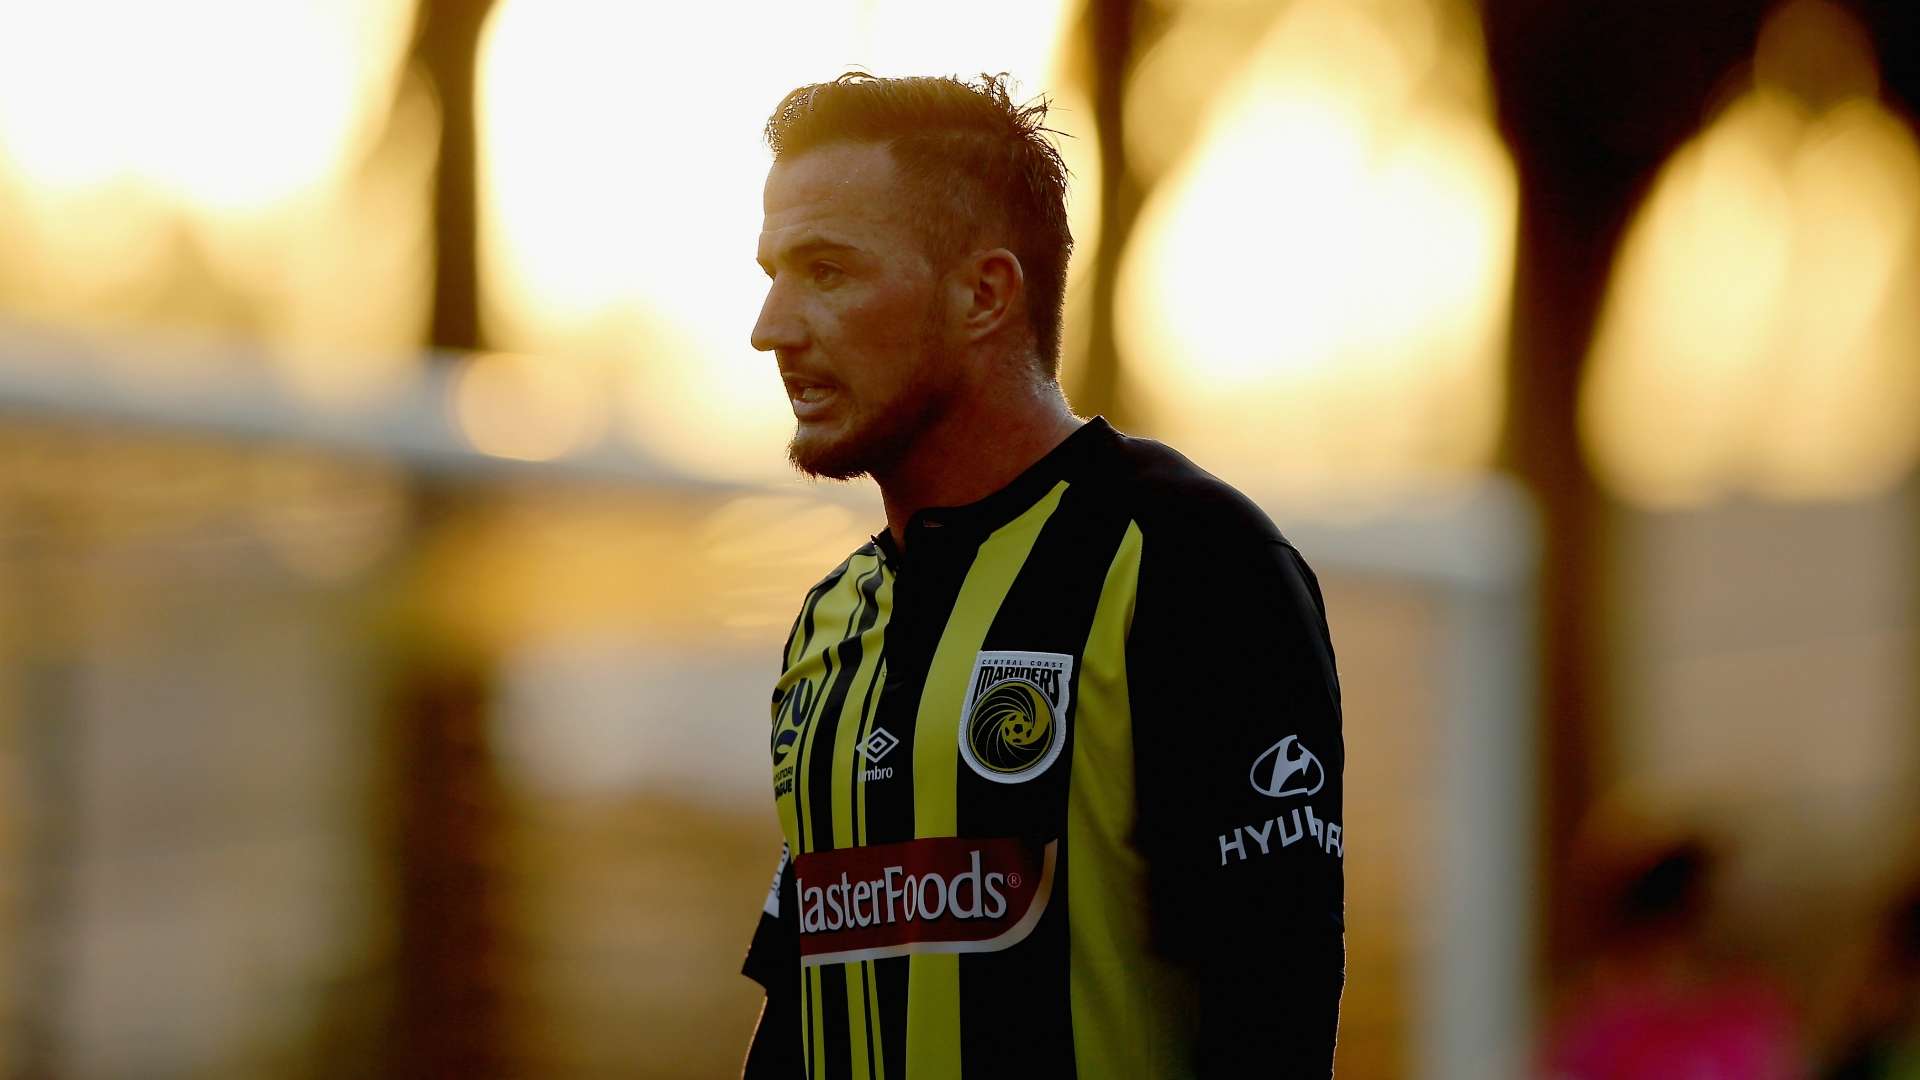 Ross McCormack Central Coast Mariners